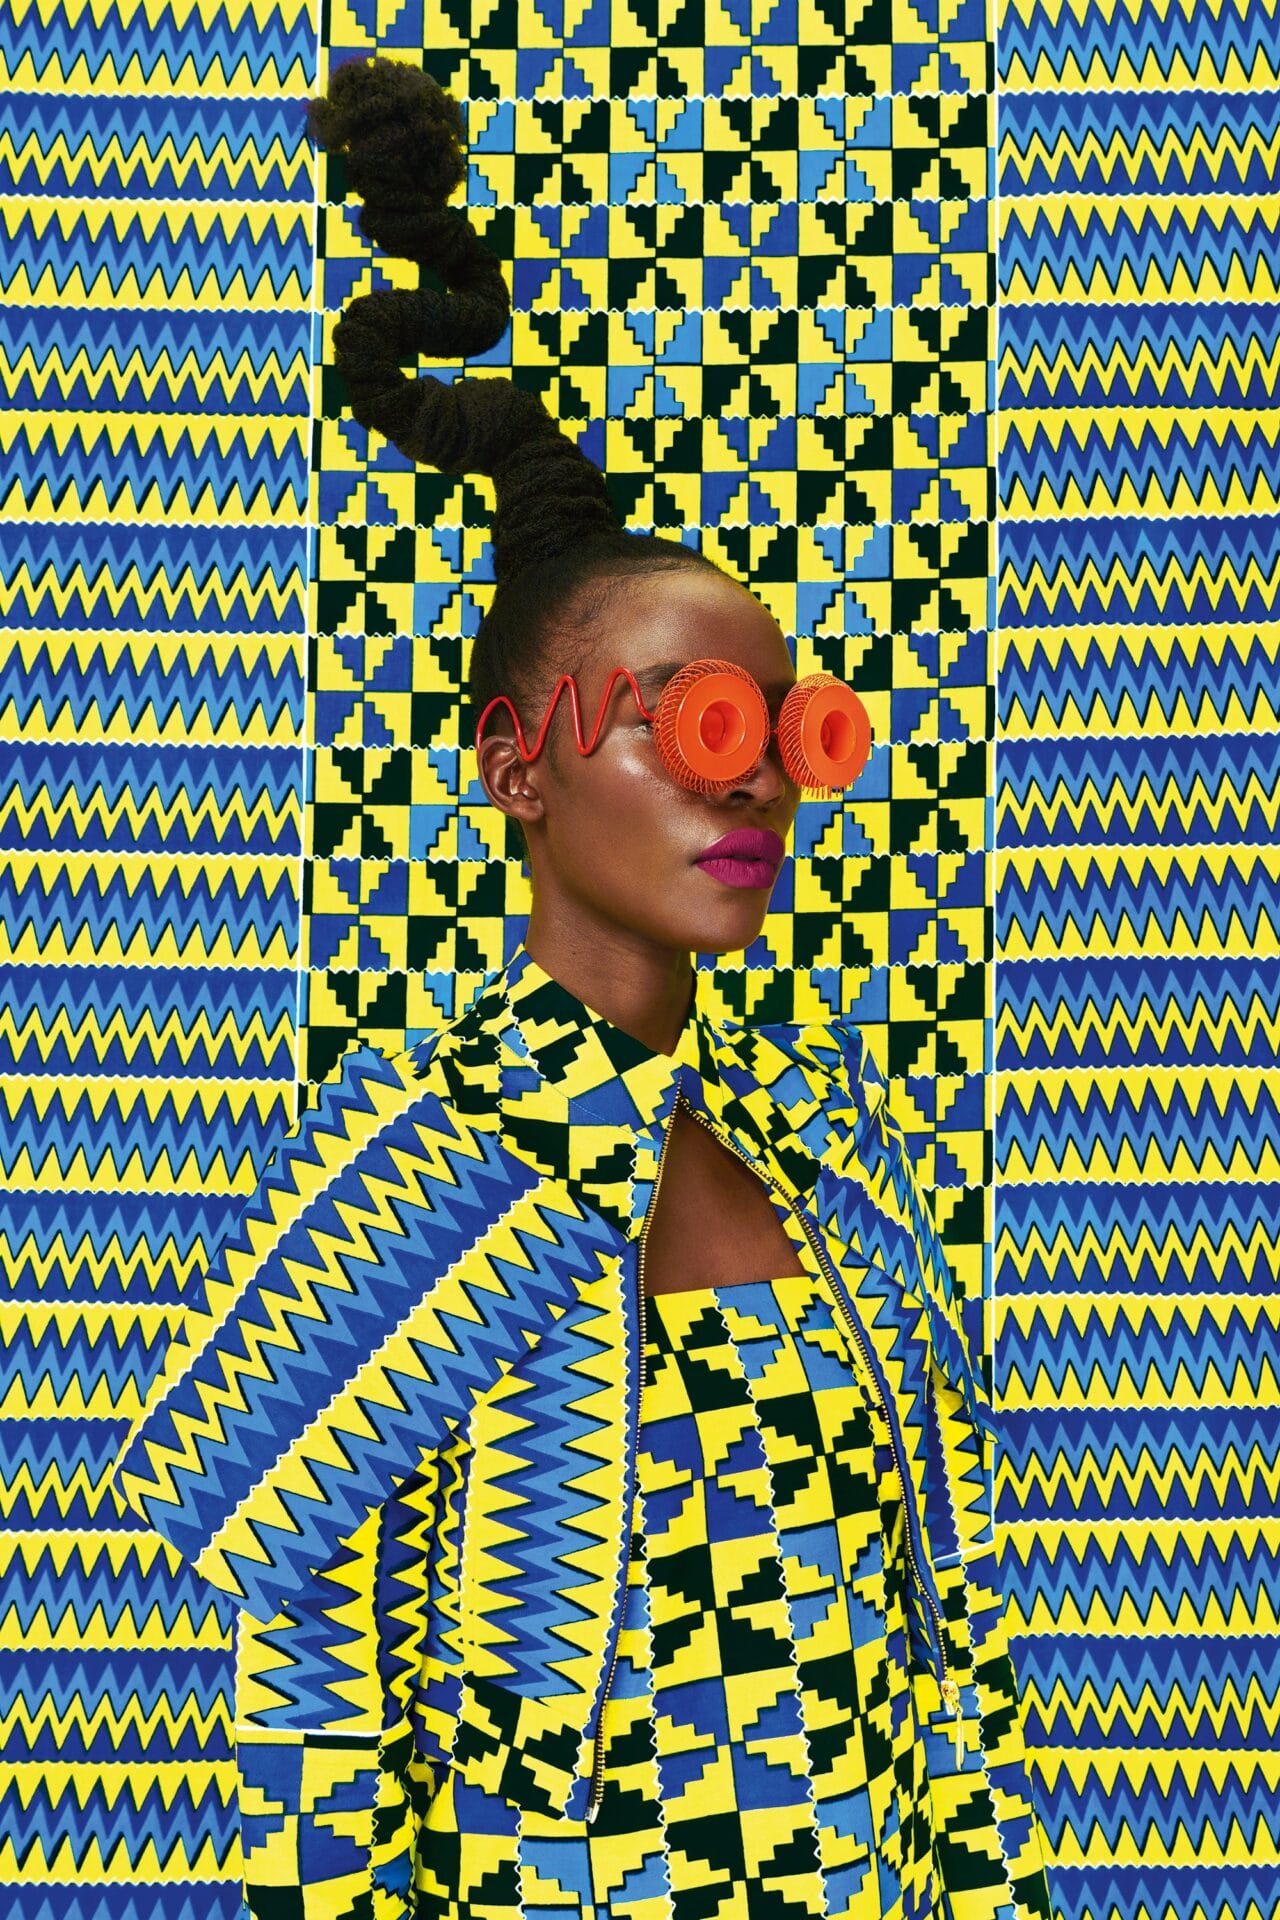 a portrait of the artist against a patterned yellow and blue backdrop. she's wearing bright orange eyewear